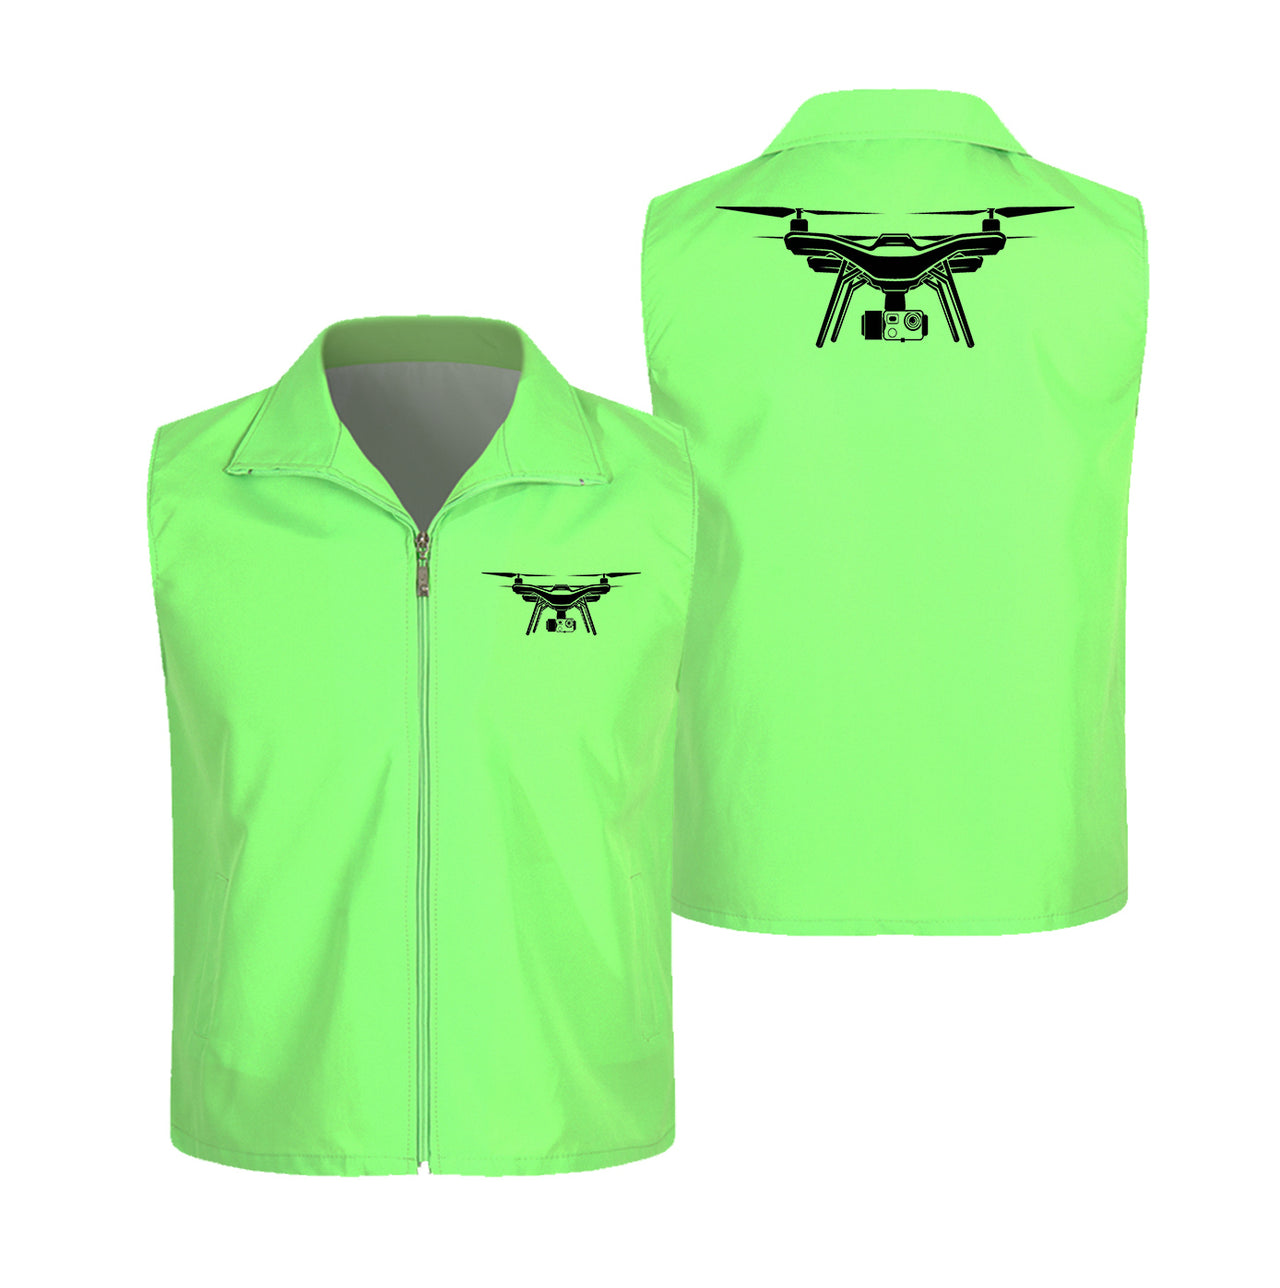 Drone Silhouette Designed Thin Style Vests